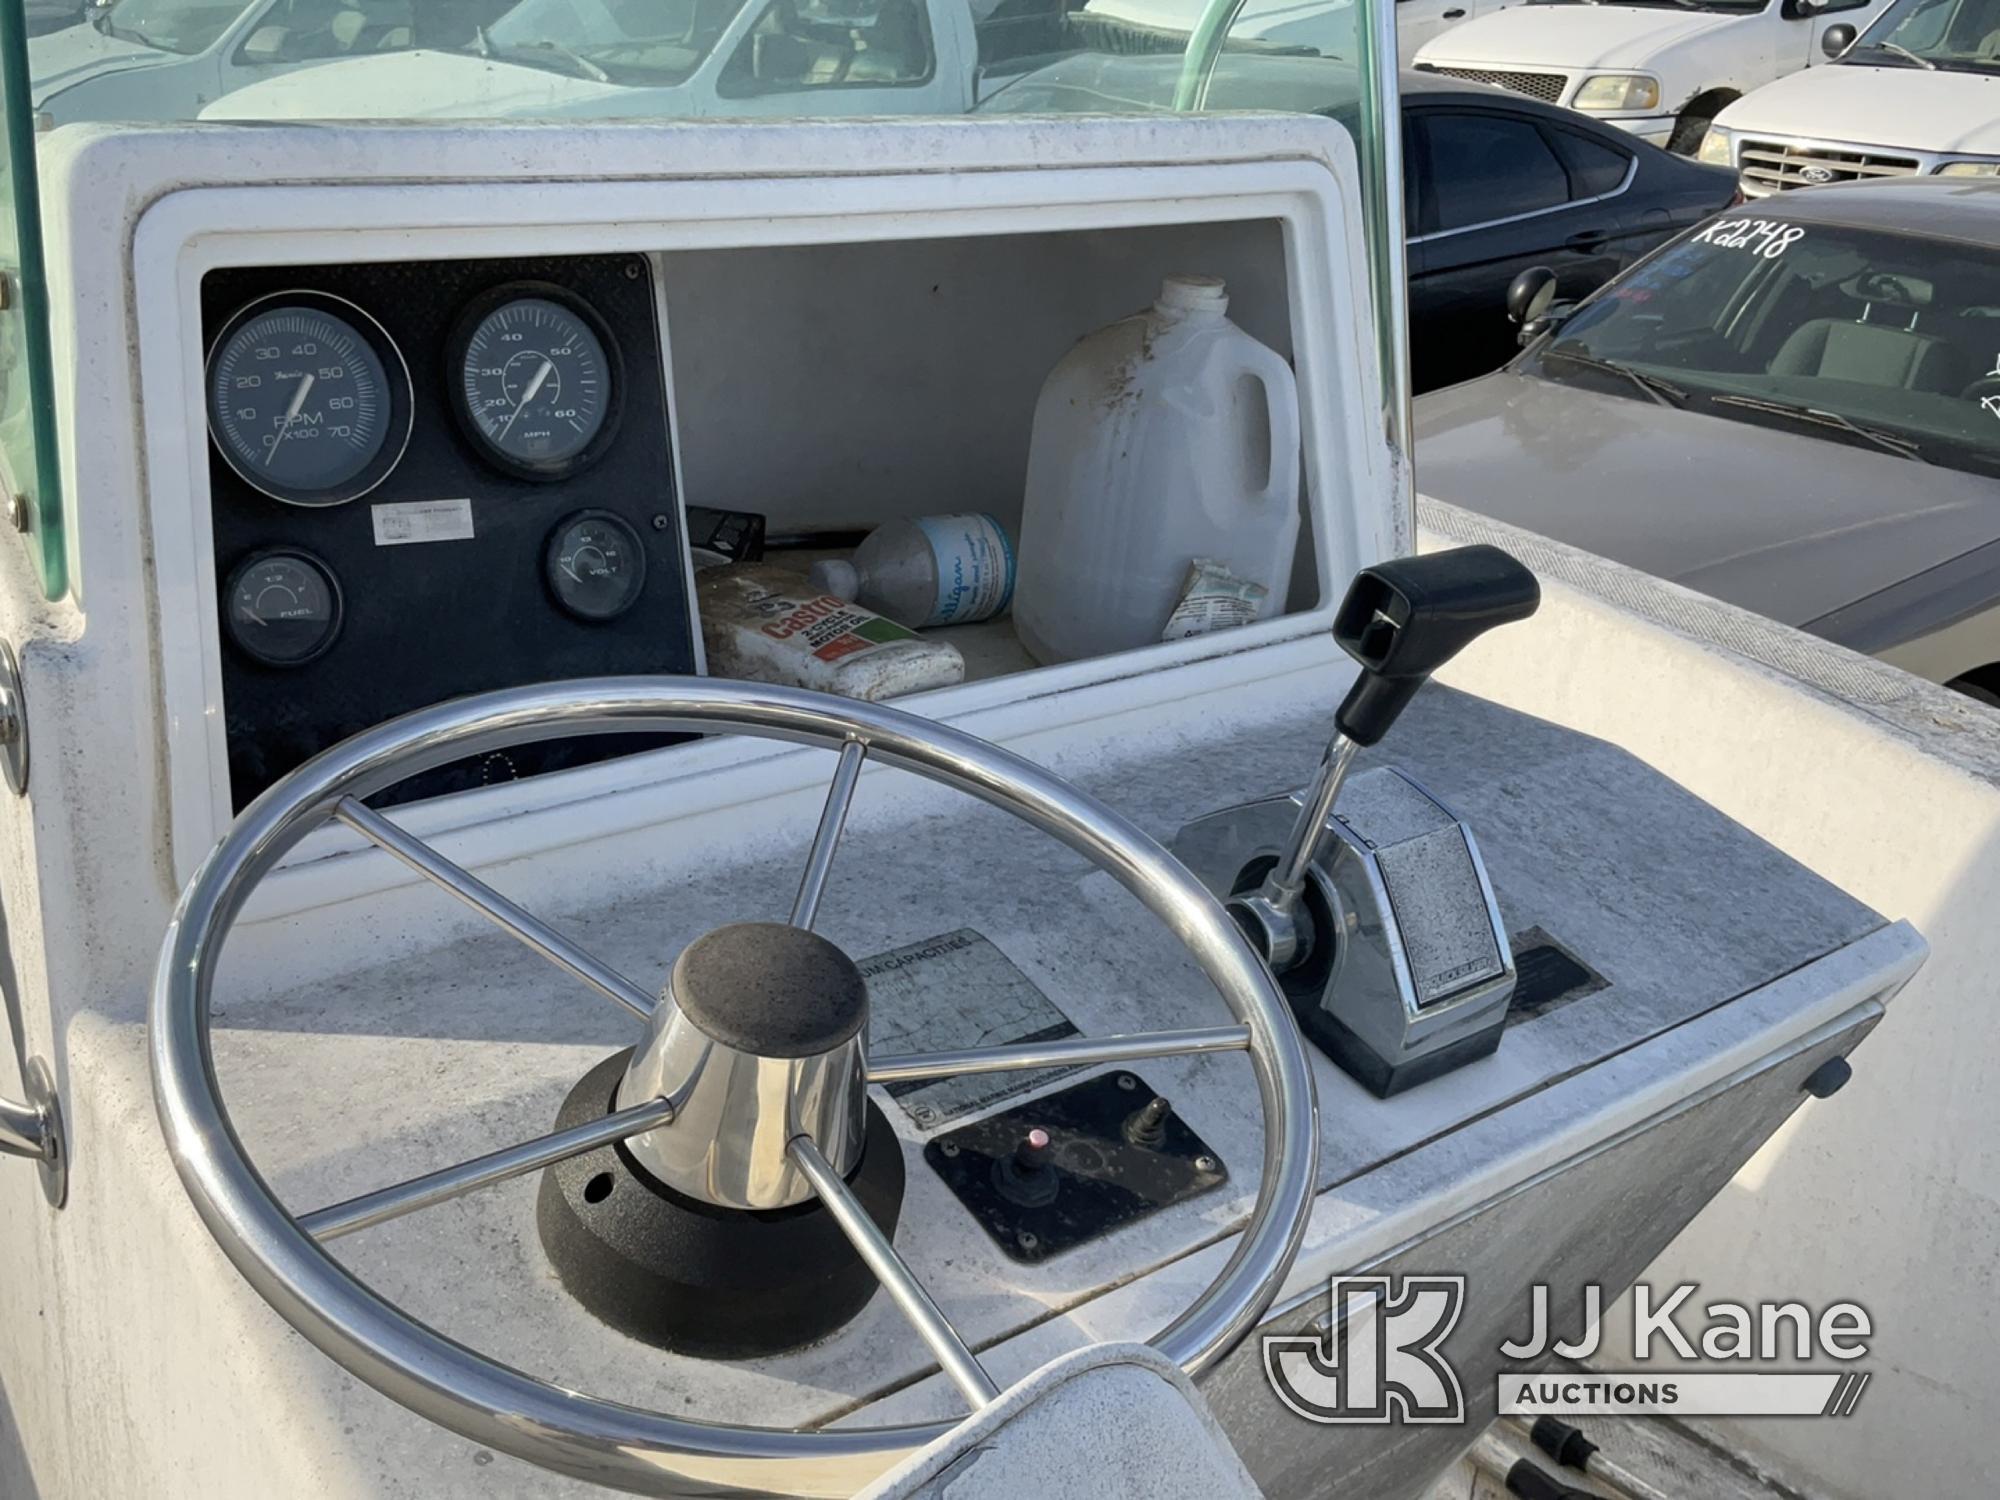 (Jurupa Valley, CA) 1996 Bayliner 18ft 11in Boat / Trailer Scuffs and Scratches